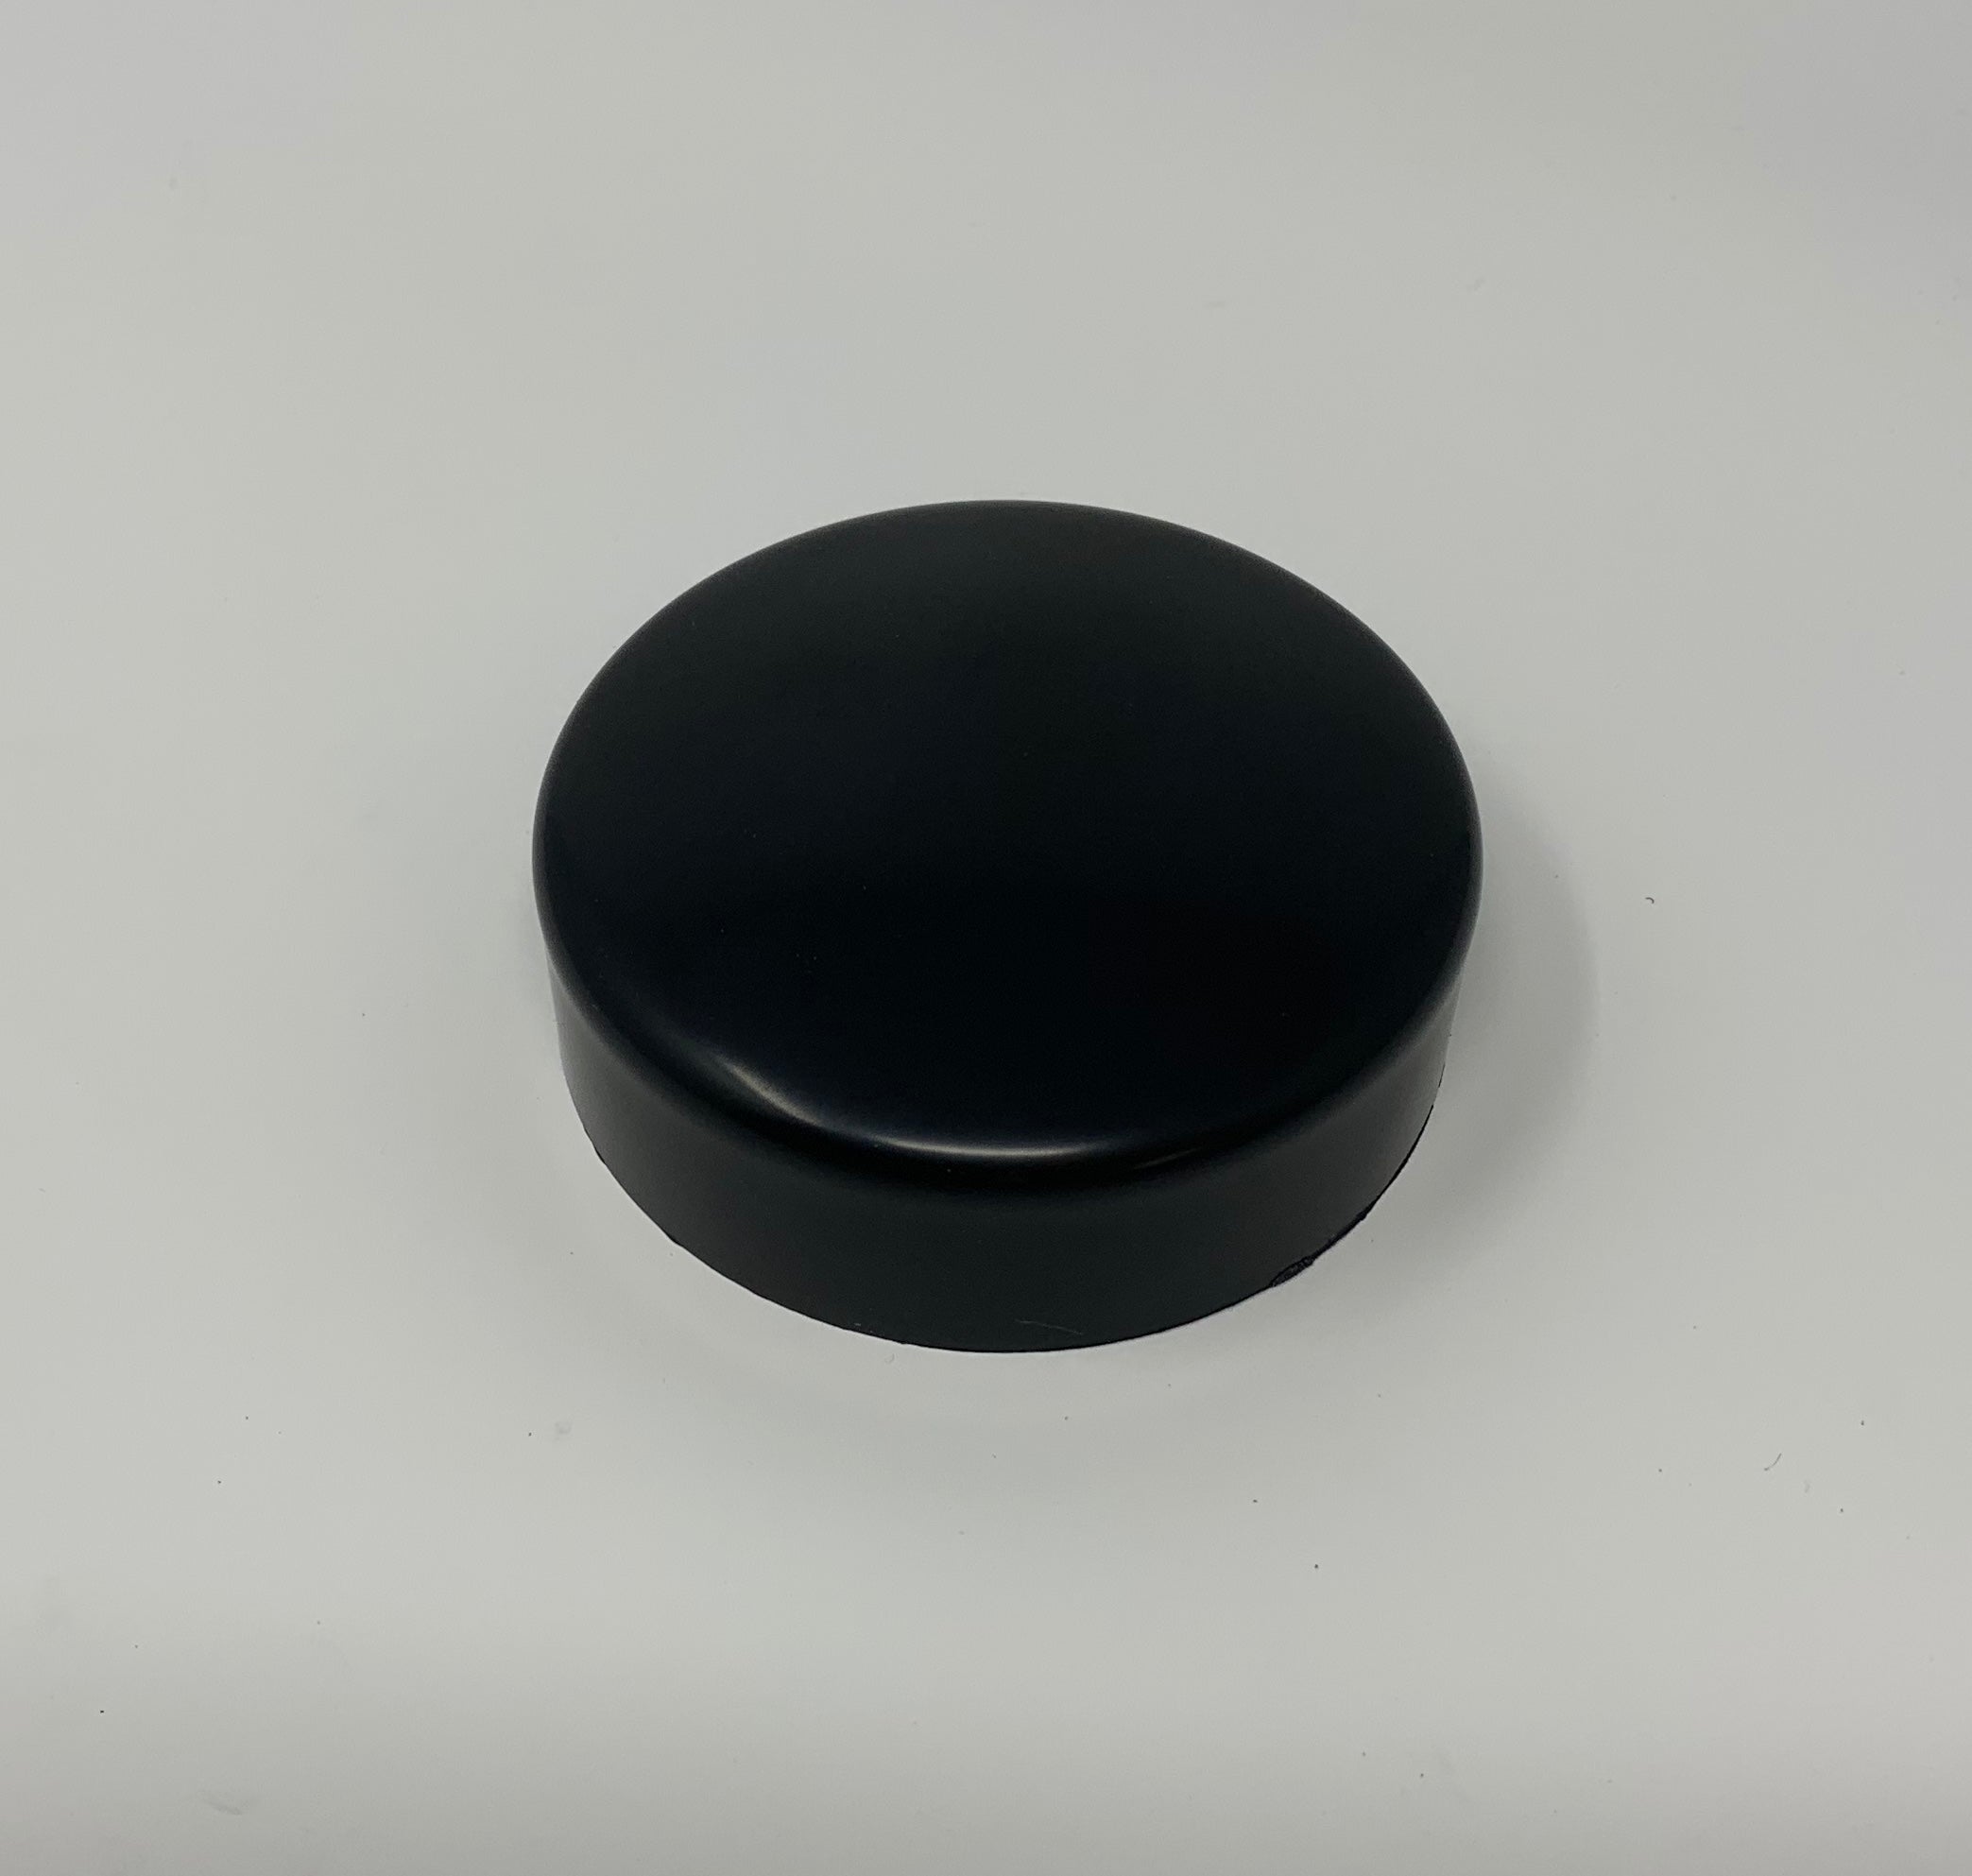 Proform Power Steering Cap Cover - Mk3/4 Mondeo (Plastic Finishes)